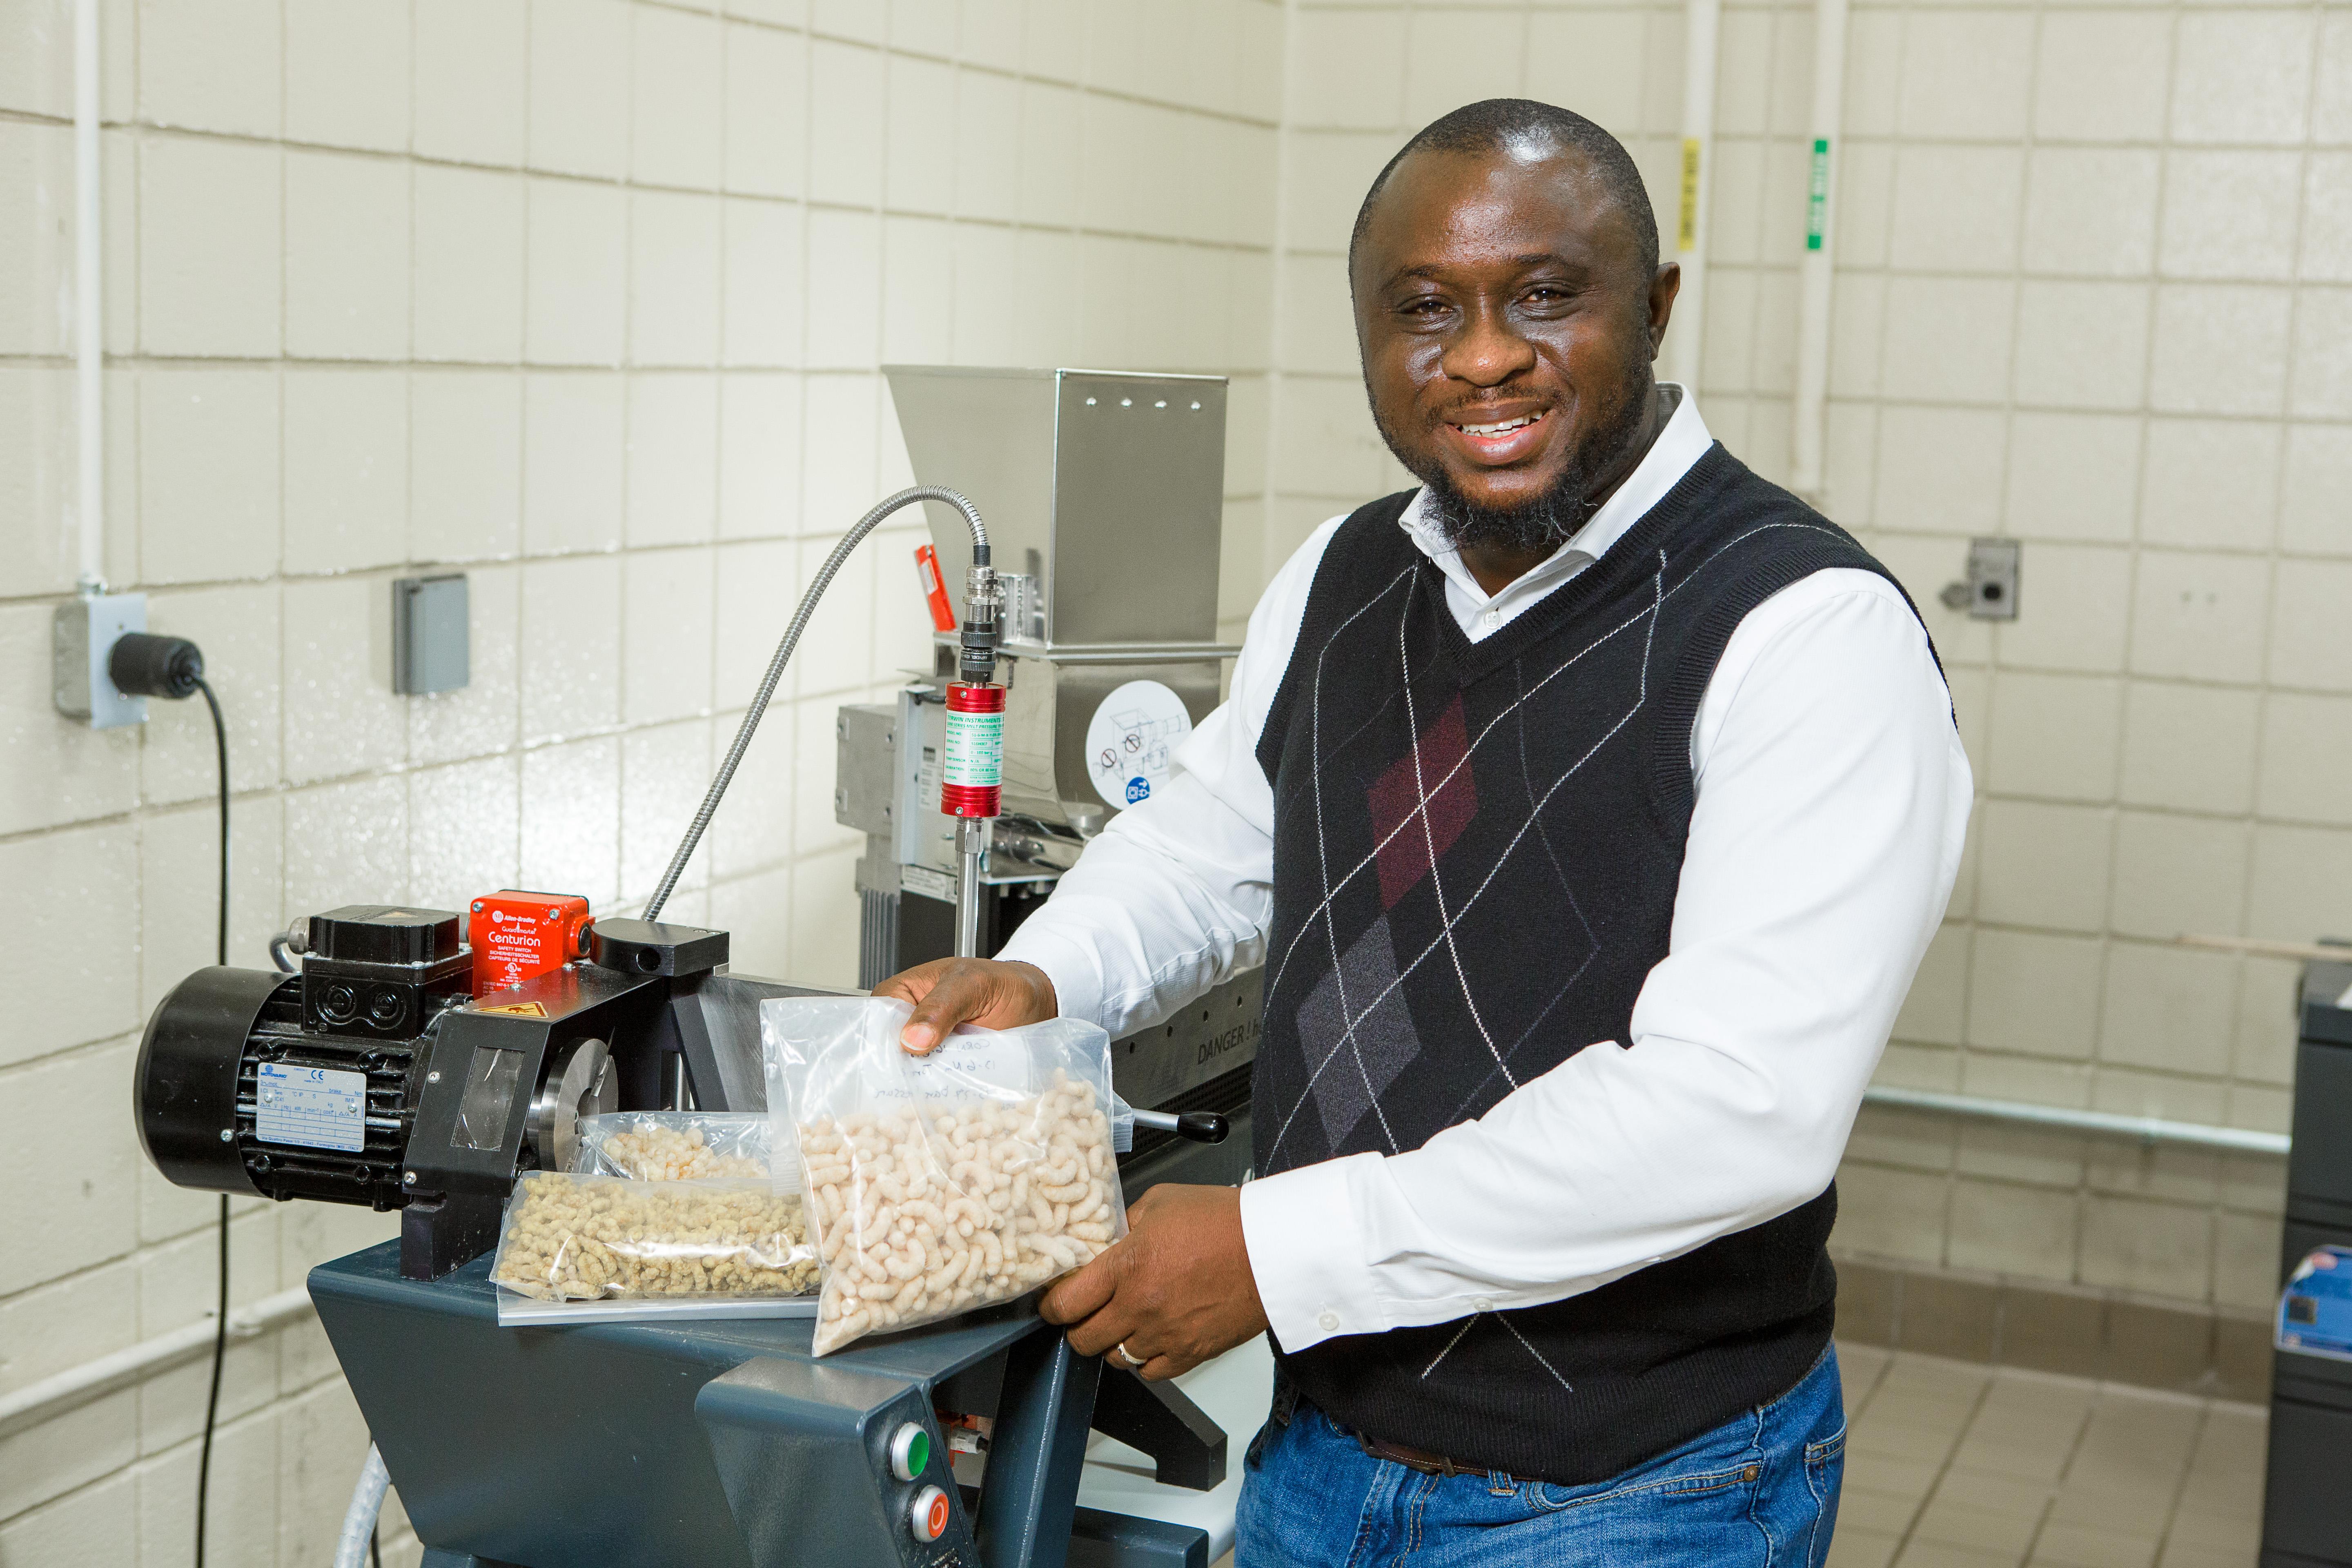 Food engineer Akinbode Adedeji, pictured here in his UK lab, is the recipient of the Canadian Society of Bioengineering's John Clark Award for his significant contributions to food engineering. Photo by Matt Barton, UK agricultural communications.